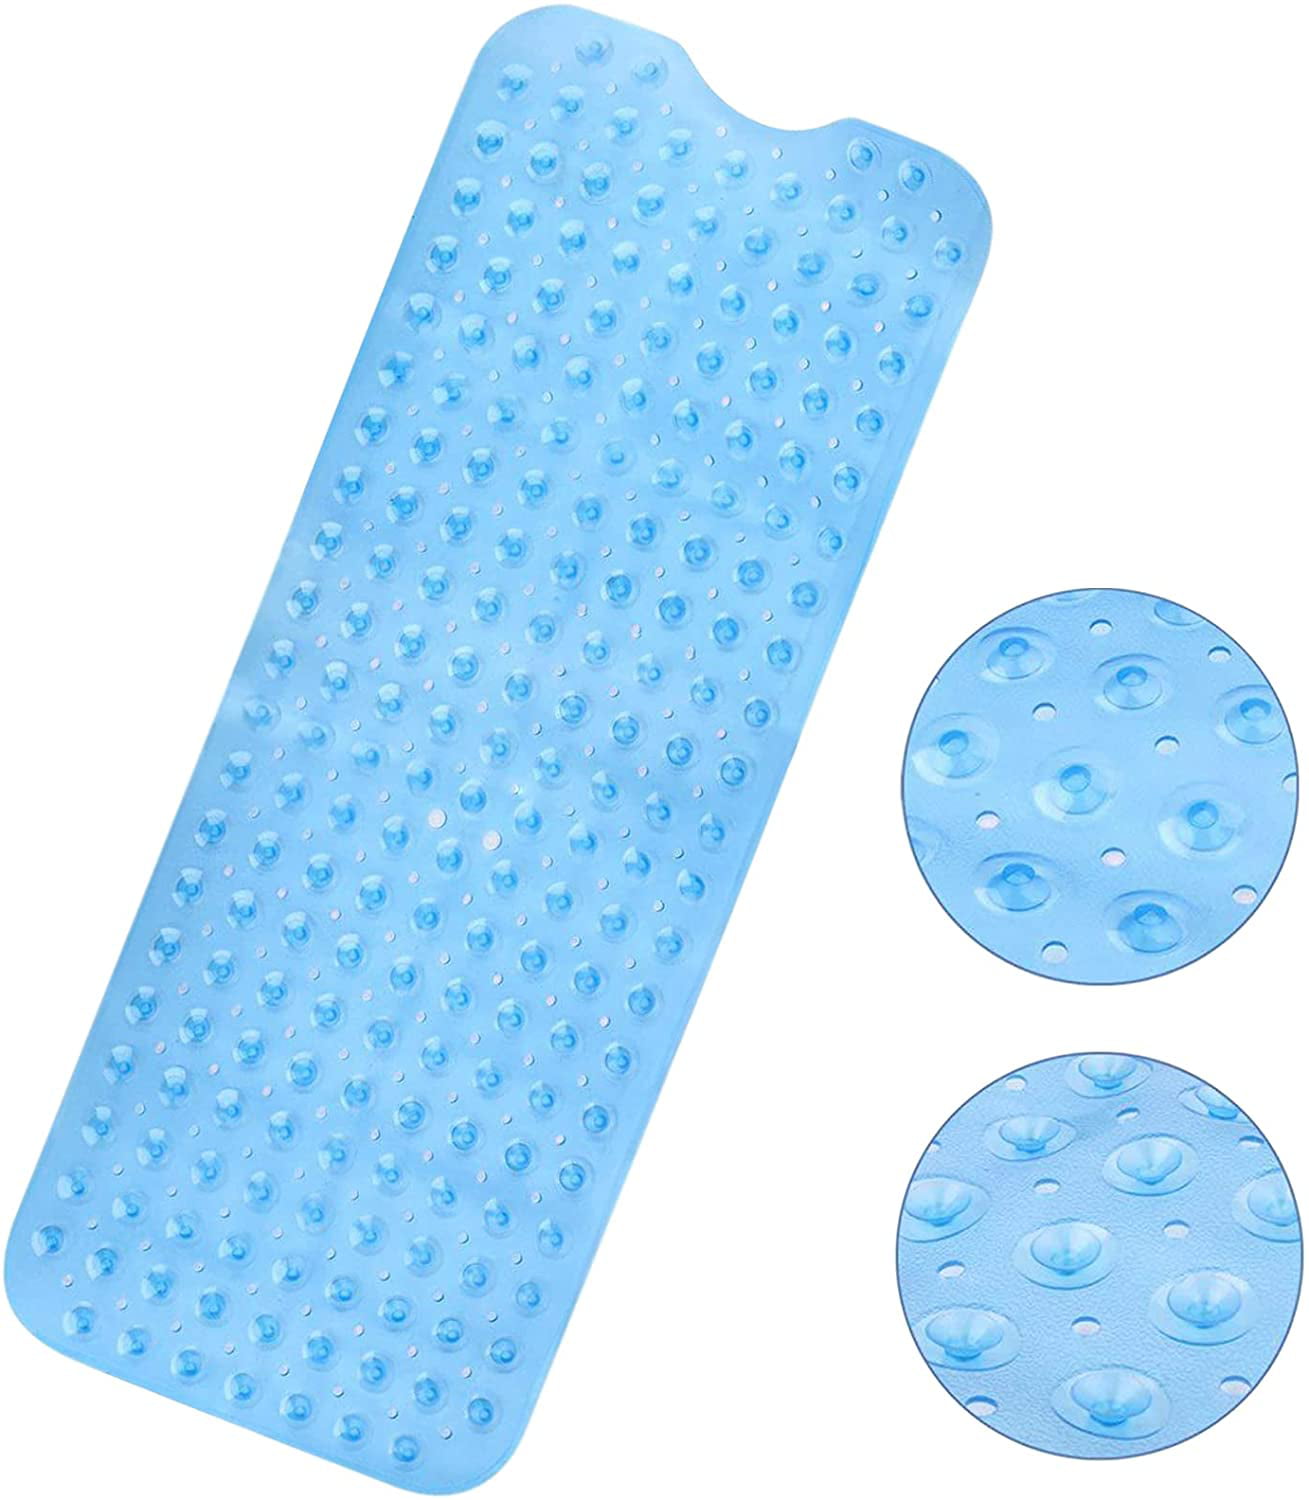 Details about   Non-slip Bathtub Mat 27"x15" Washable Oval Bath Tub Shower Mat with Suction Cups 